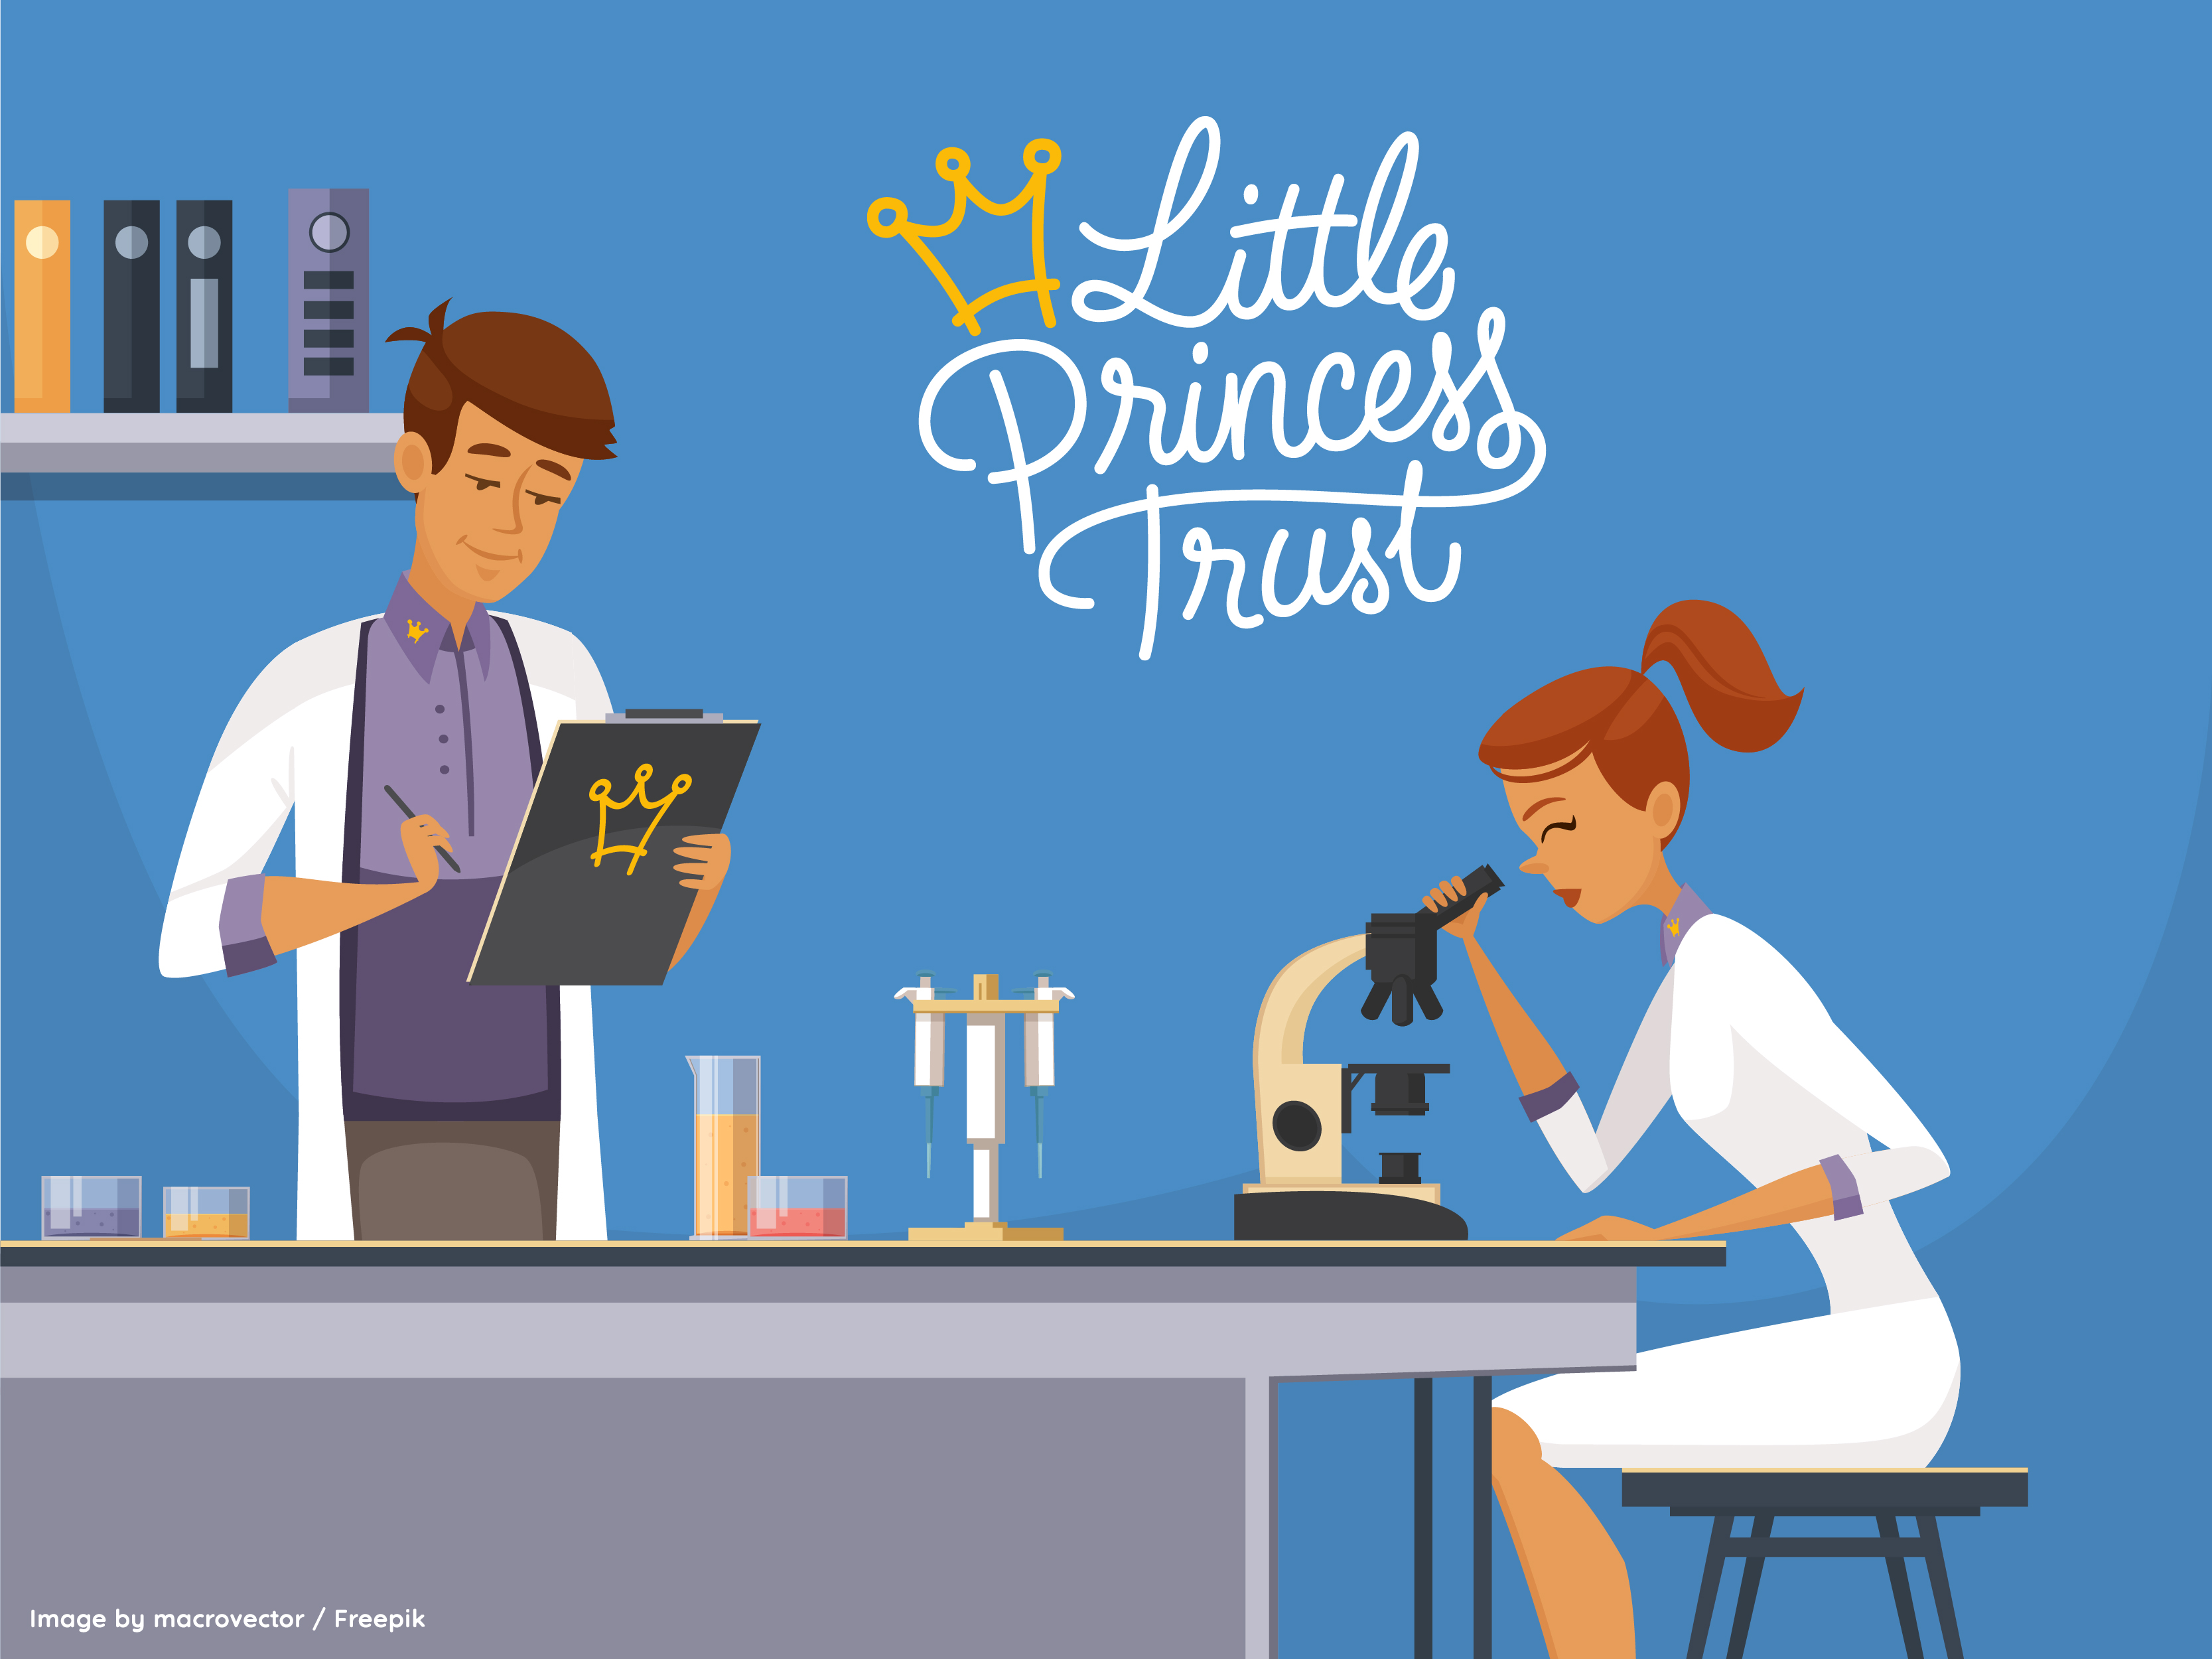 The Little Princess Trust has been funding childhood cancer research since 2016.